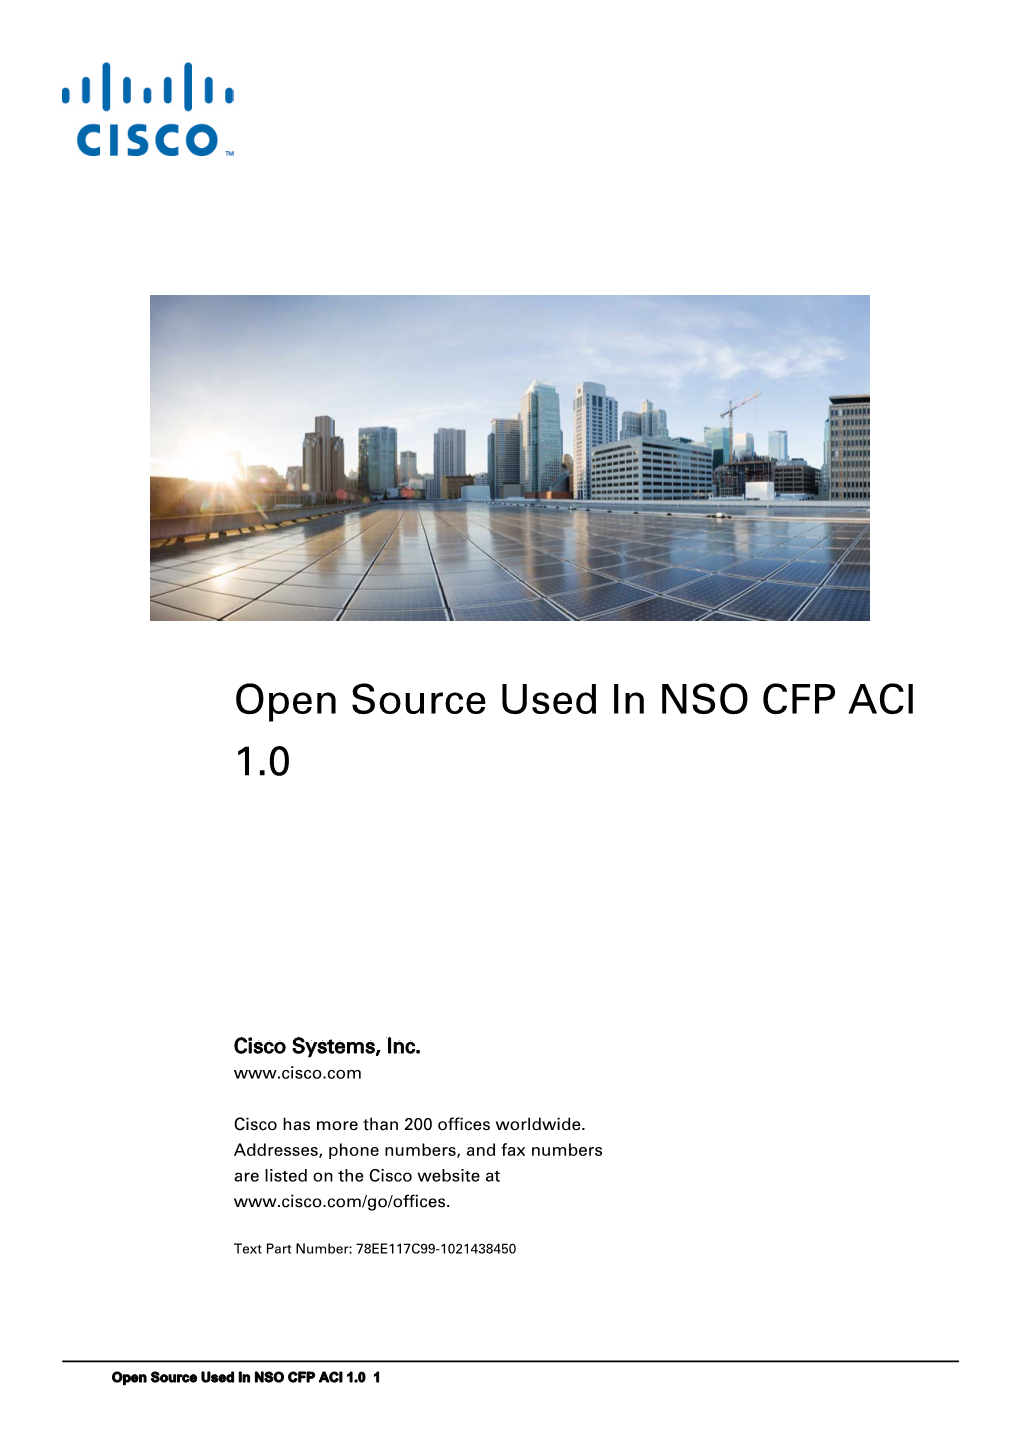 Open Source Used in NSO CFP ACI 1.0